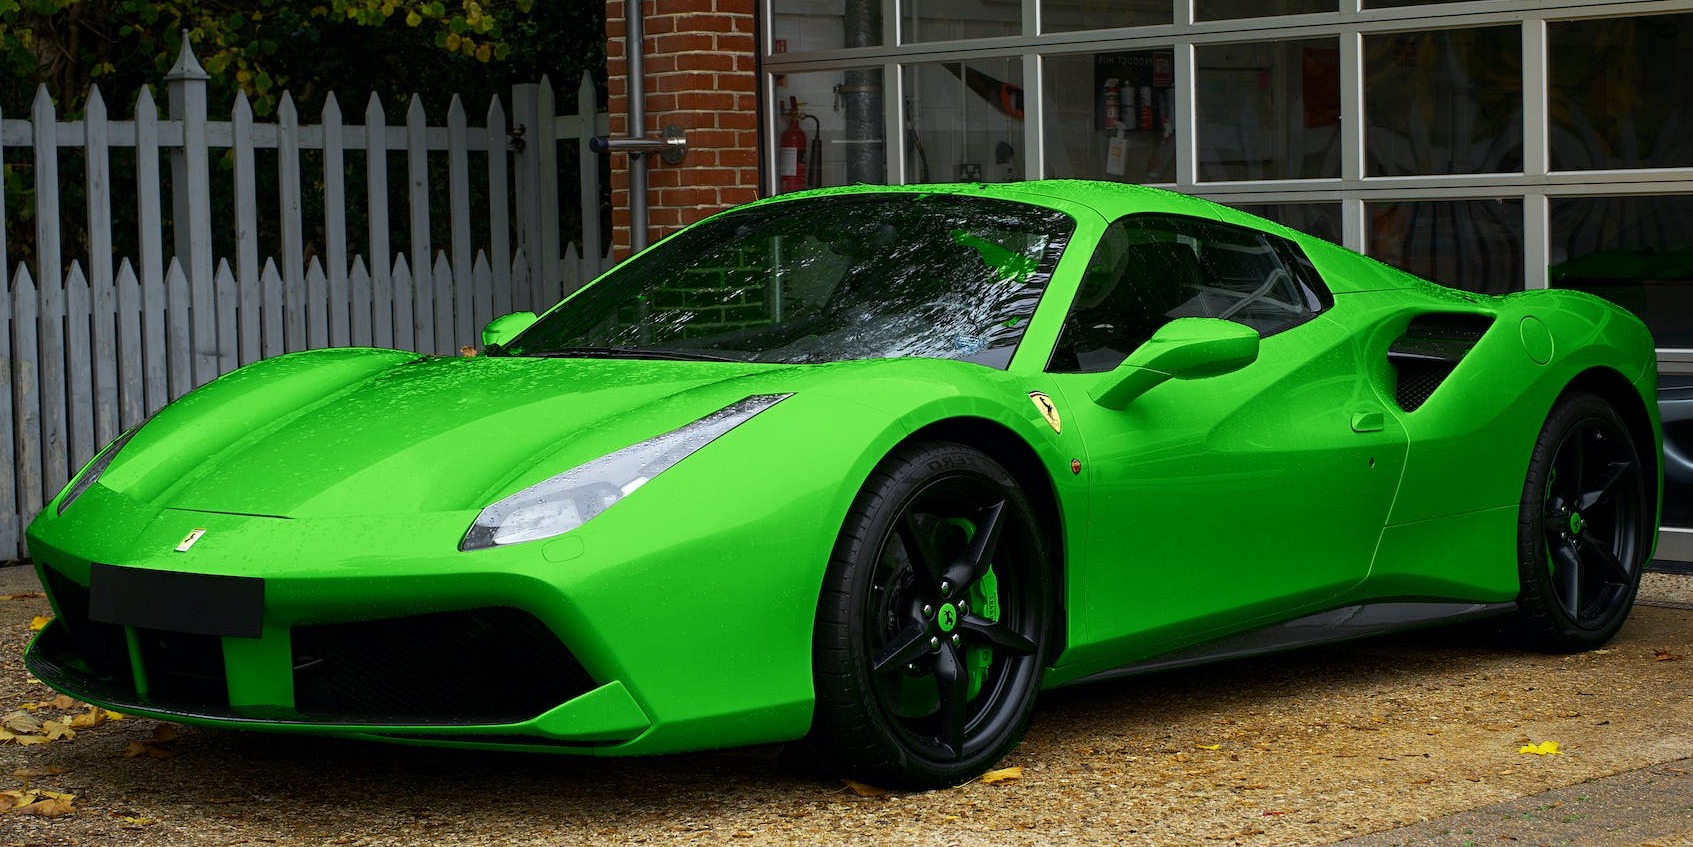 The Complete Cost Breakdown of Hiring a Supercar in the UK